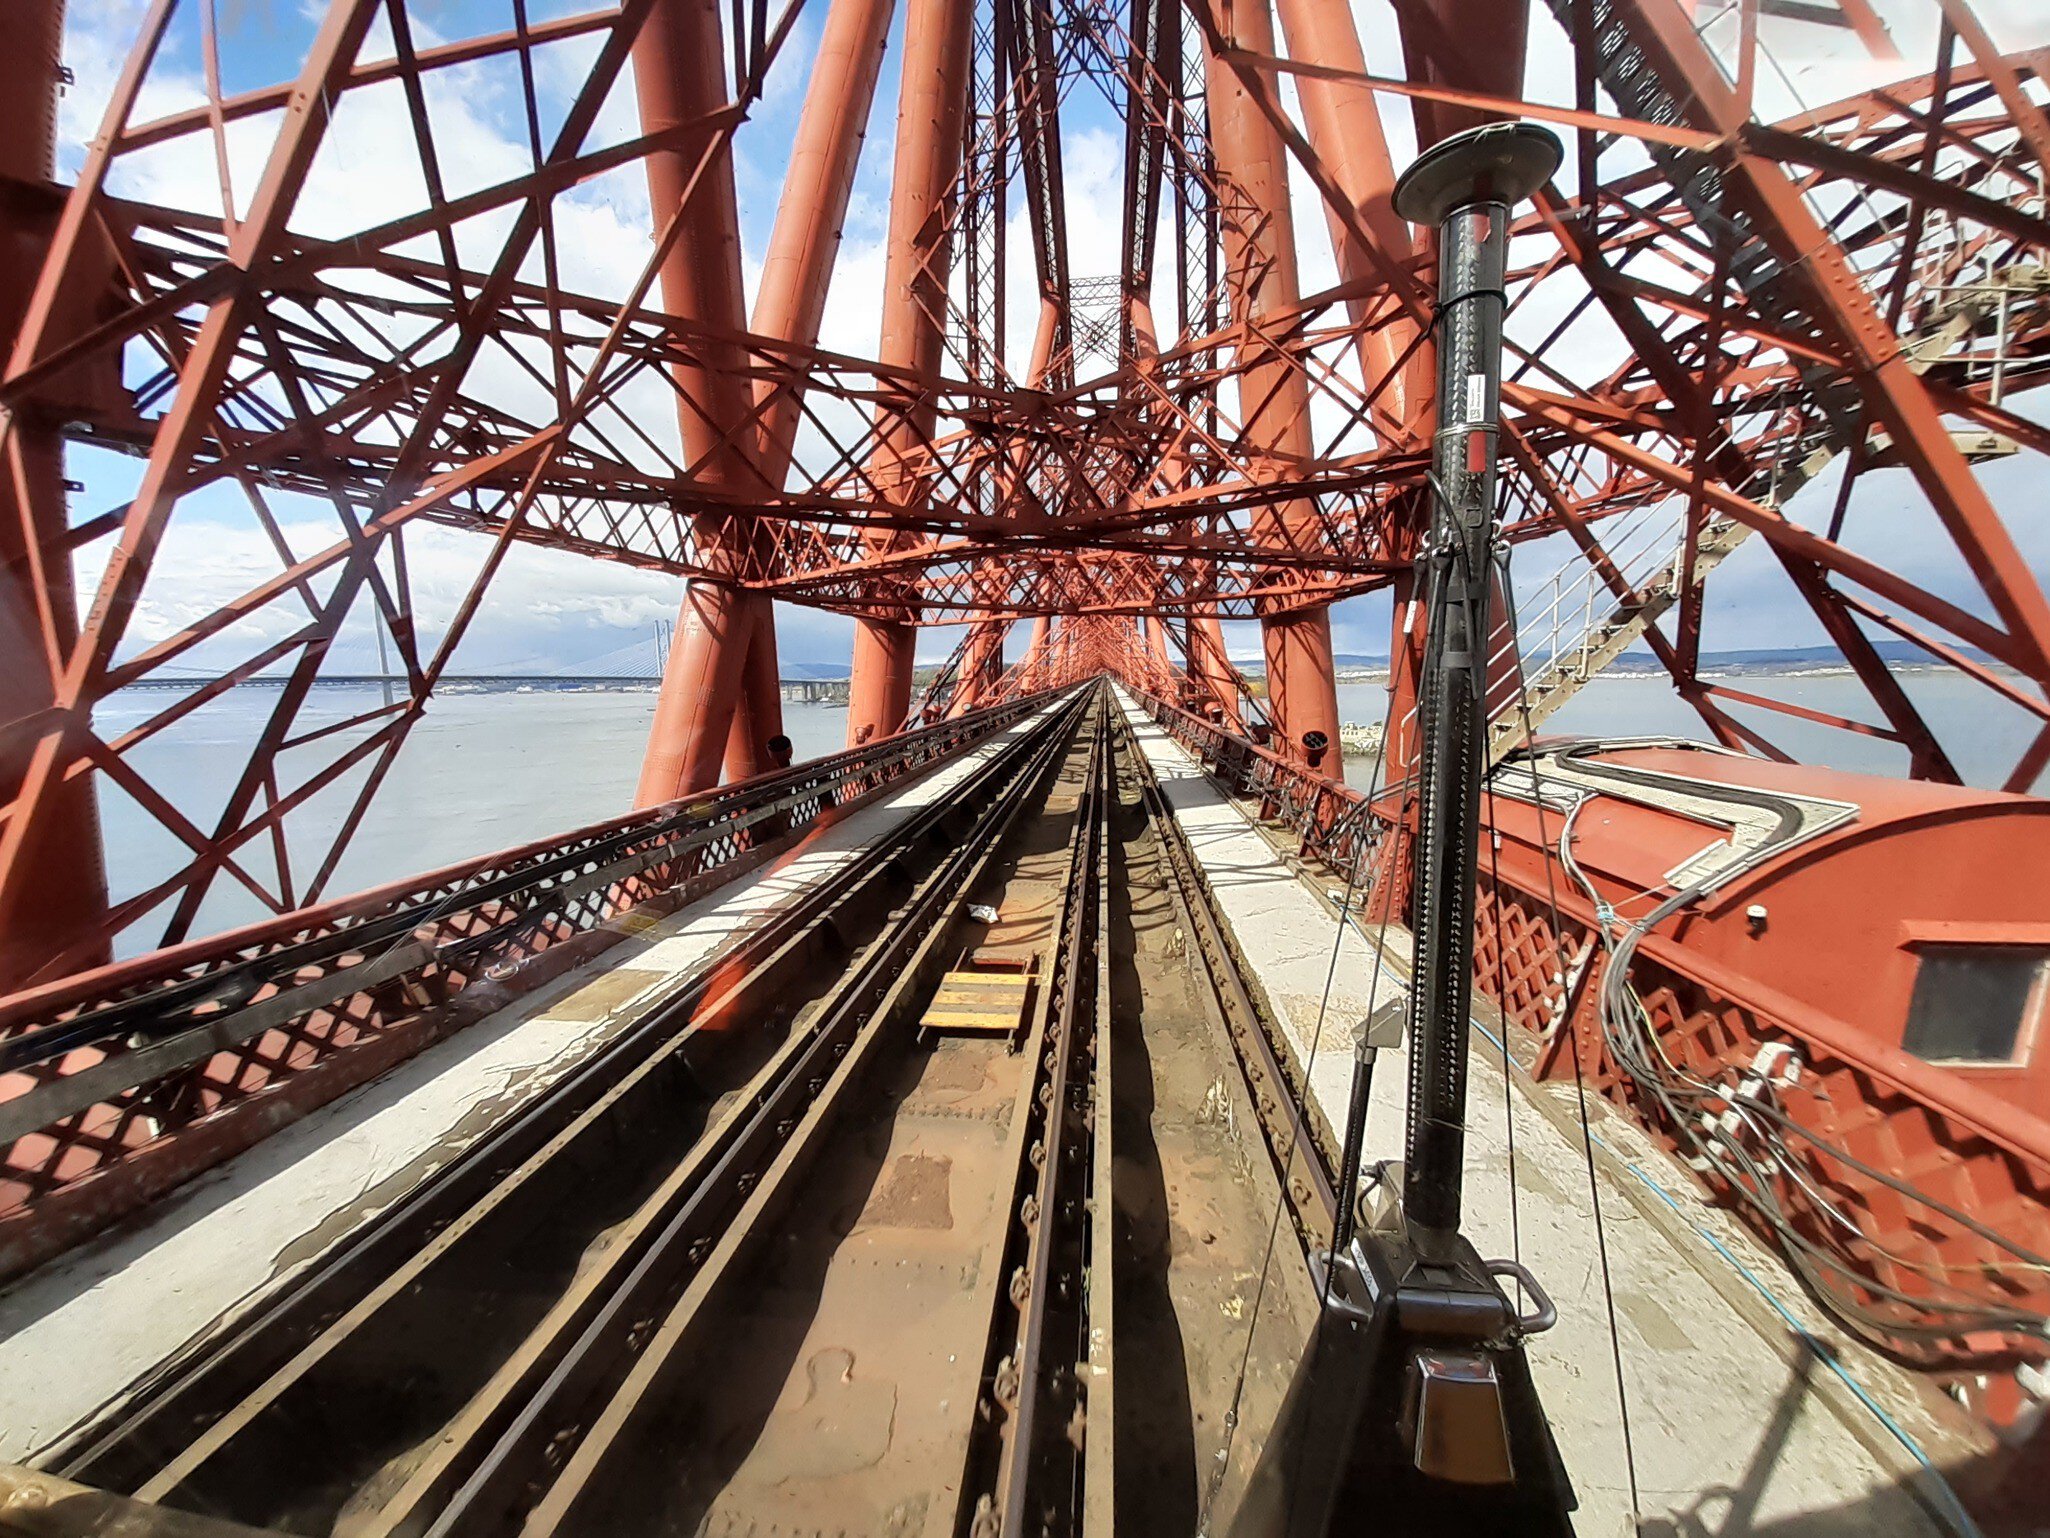 Captured image showing Forth Bridge superstructure and surrounding environment